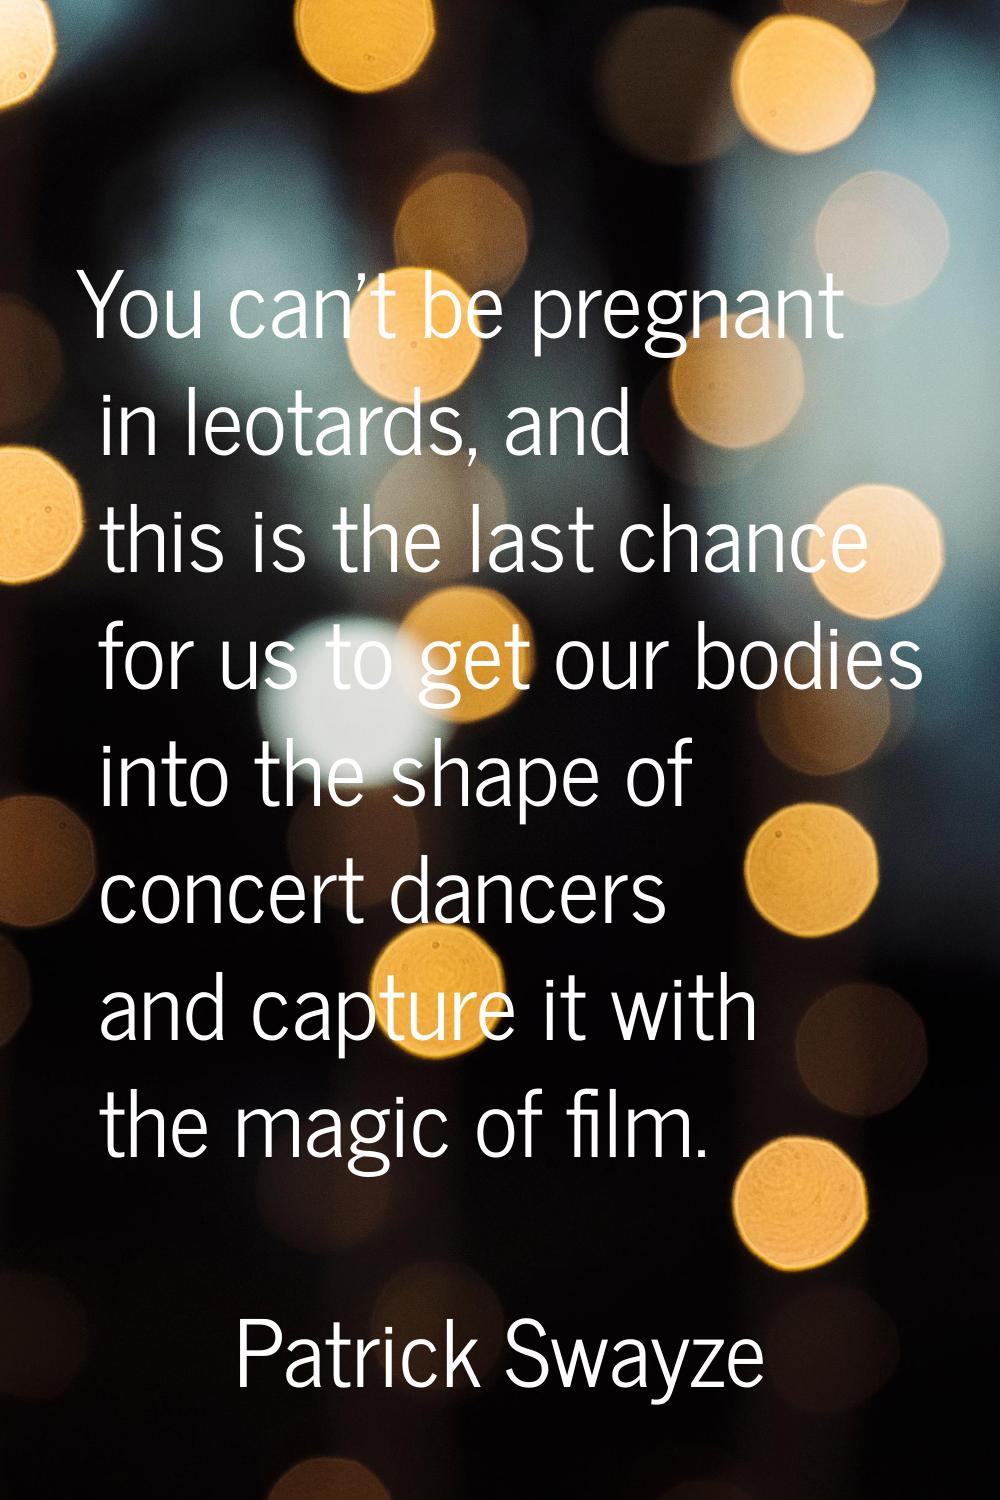 You can't be pregnant in leotards, and this is the last chance for us to get our bodies into the sh